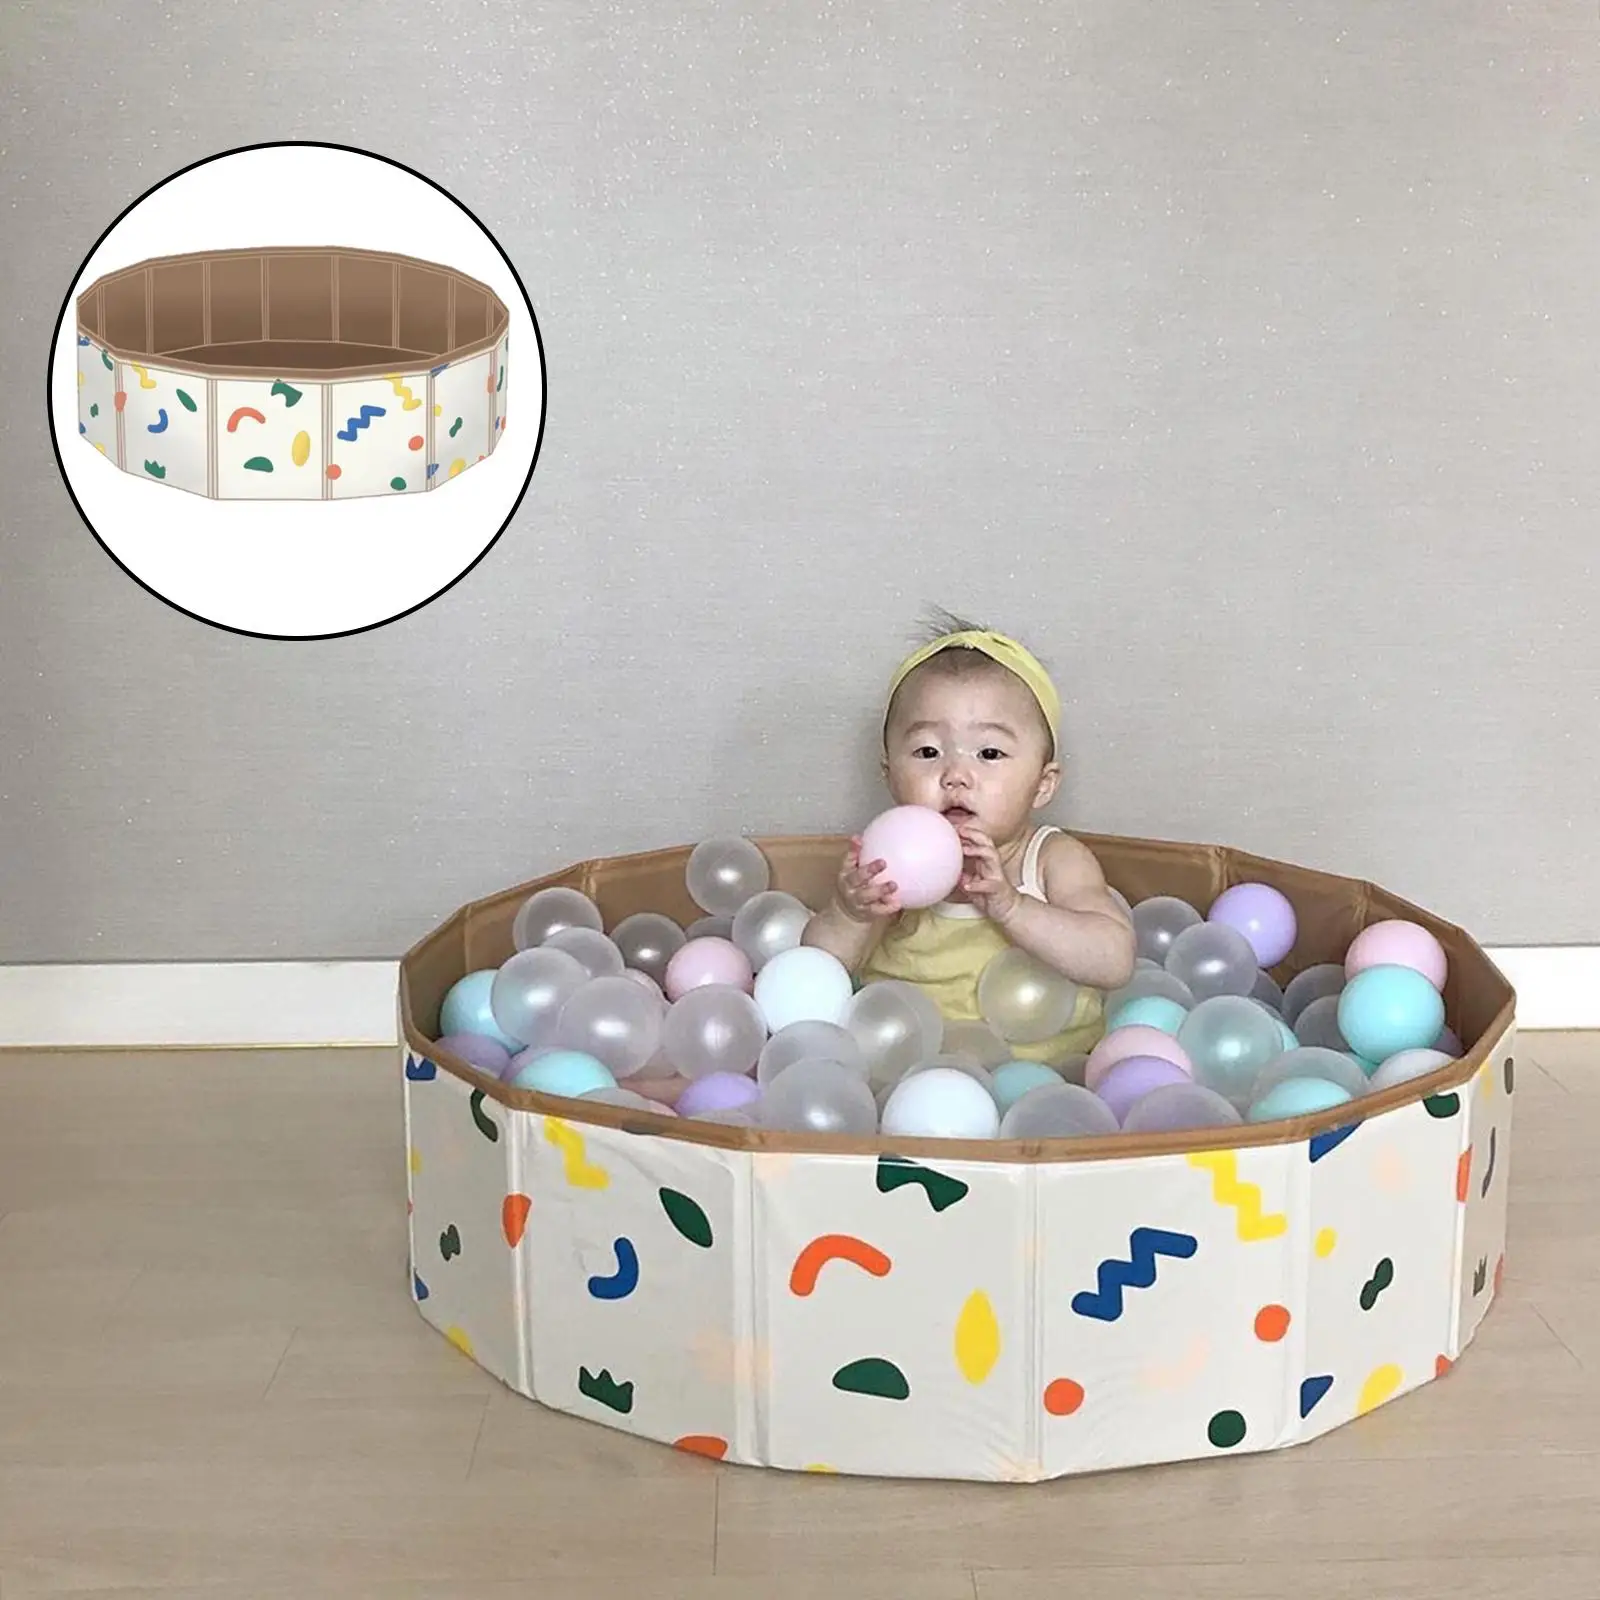 Multifunctional Foldable Baby Swimming Pool Fences Children Playpen Activity